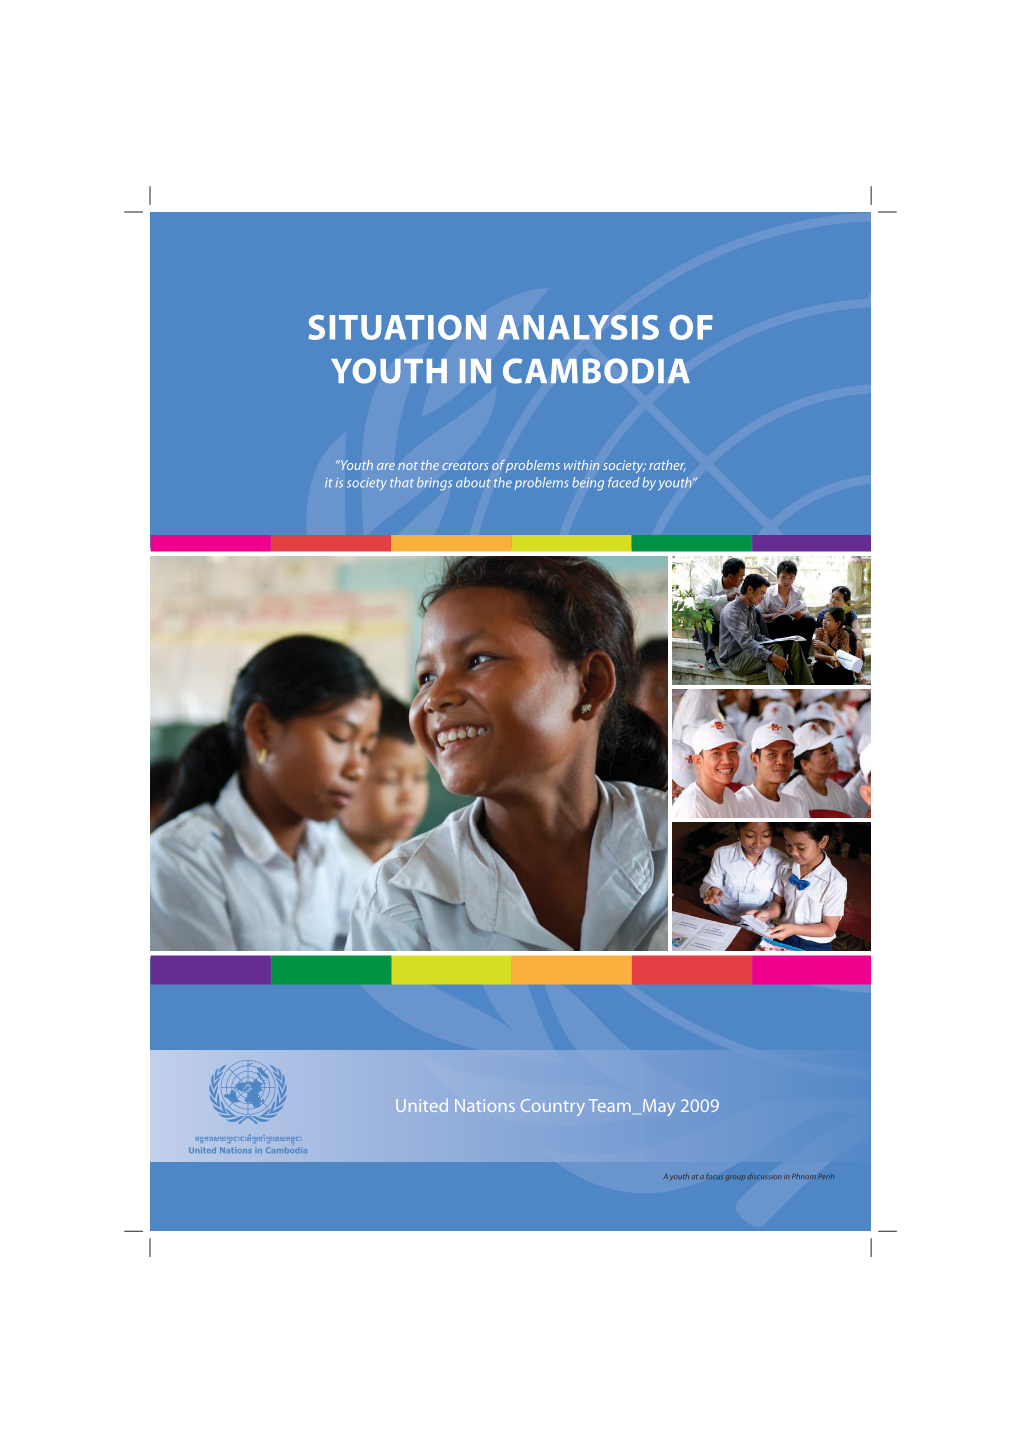 Situation Analysis for Youth in Cambodia